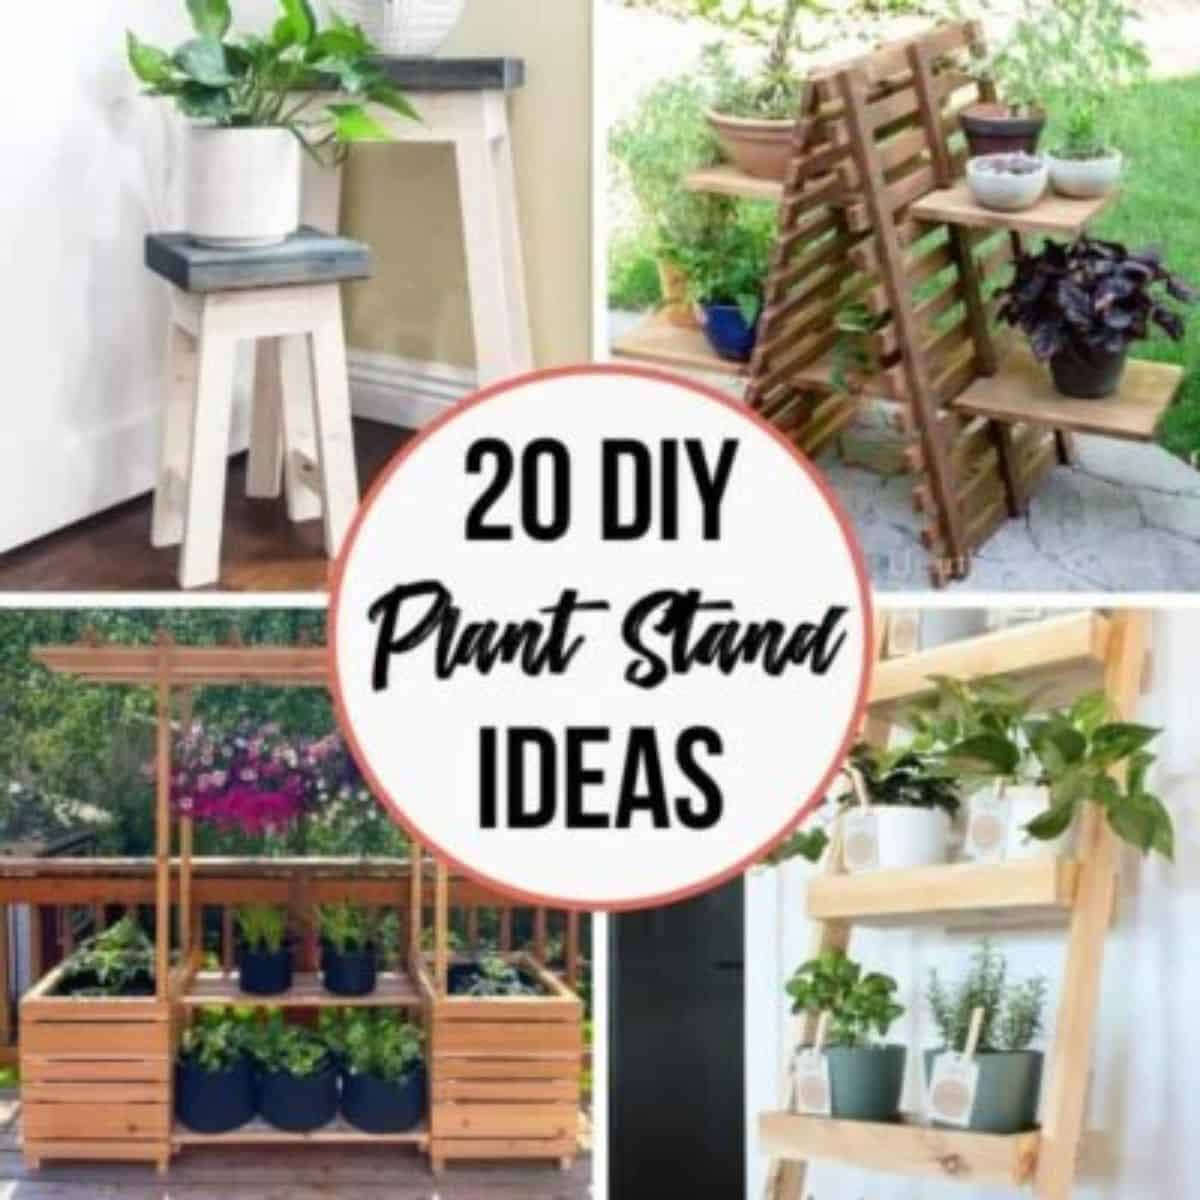 20 Amazing DIY Stand Ideas for Your - The Handyman's Daughter